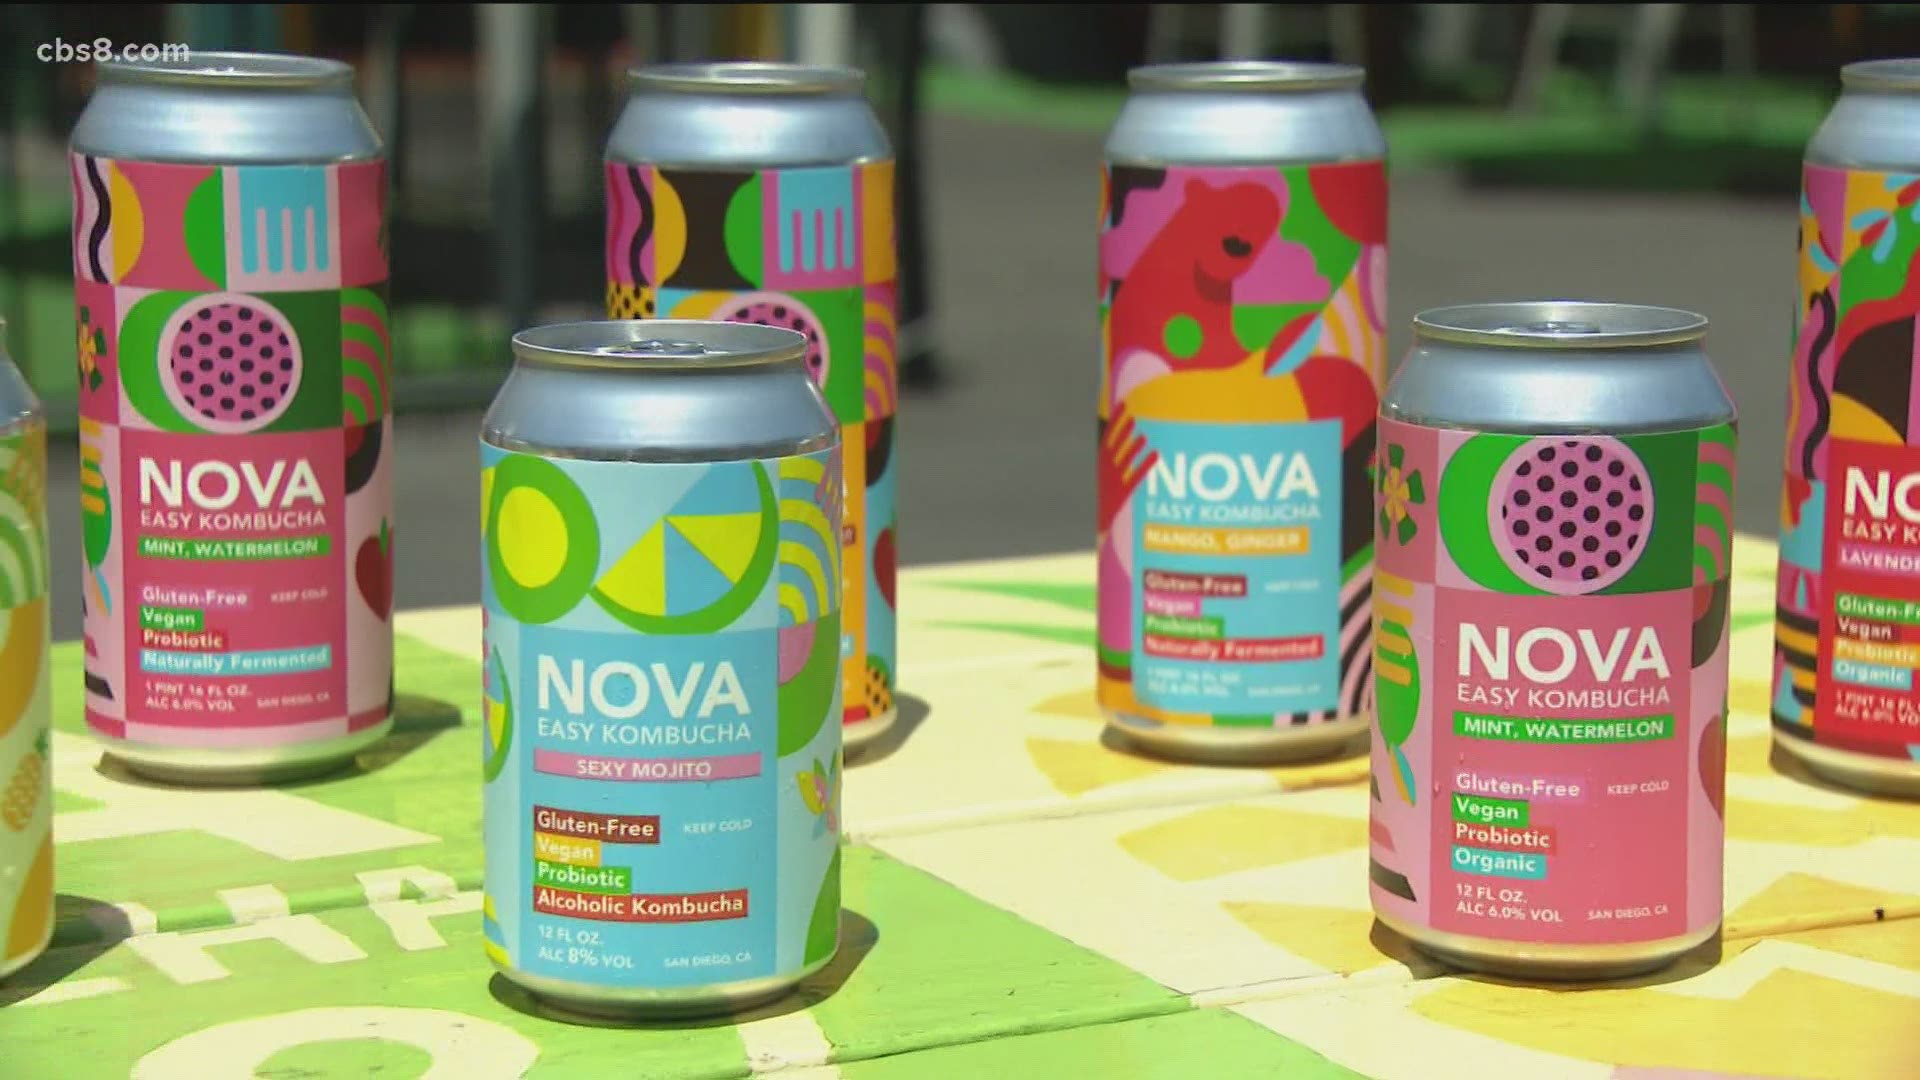 At Novo Brewing, they say they source the highest natural ingredients to give you something you feel good about putting in your body.